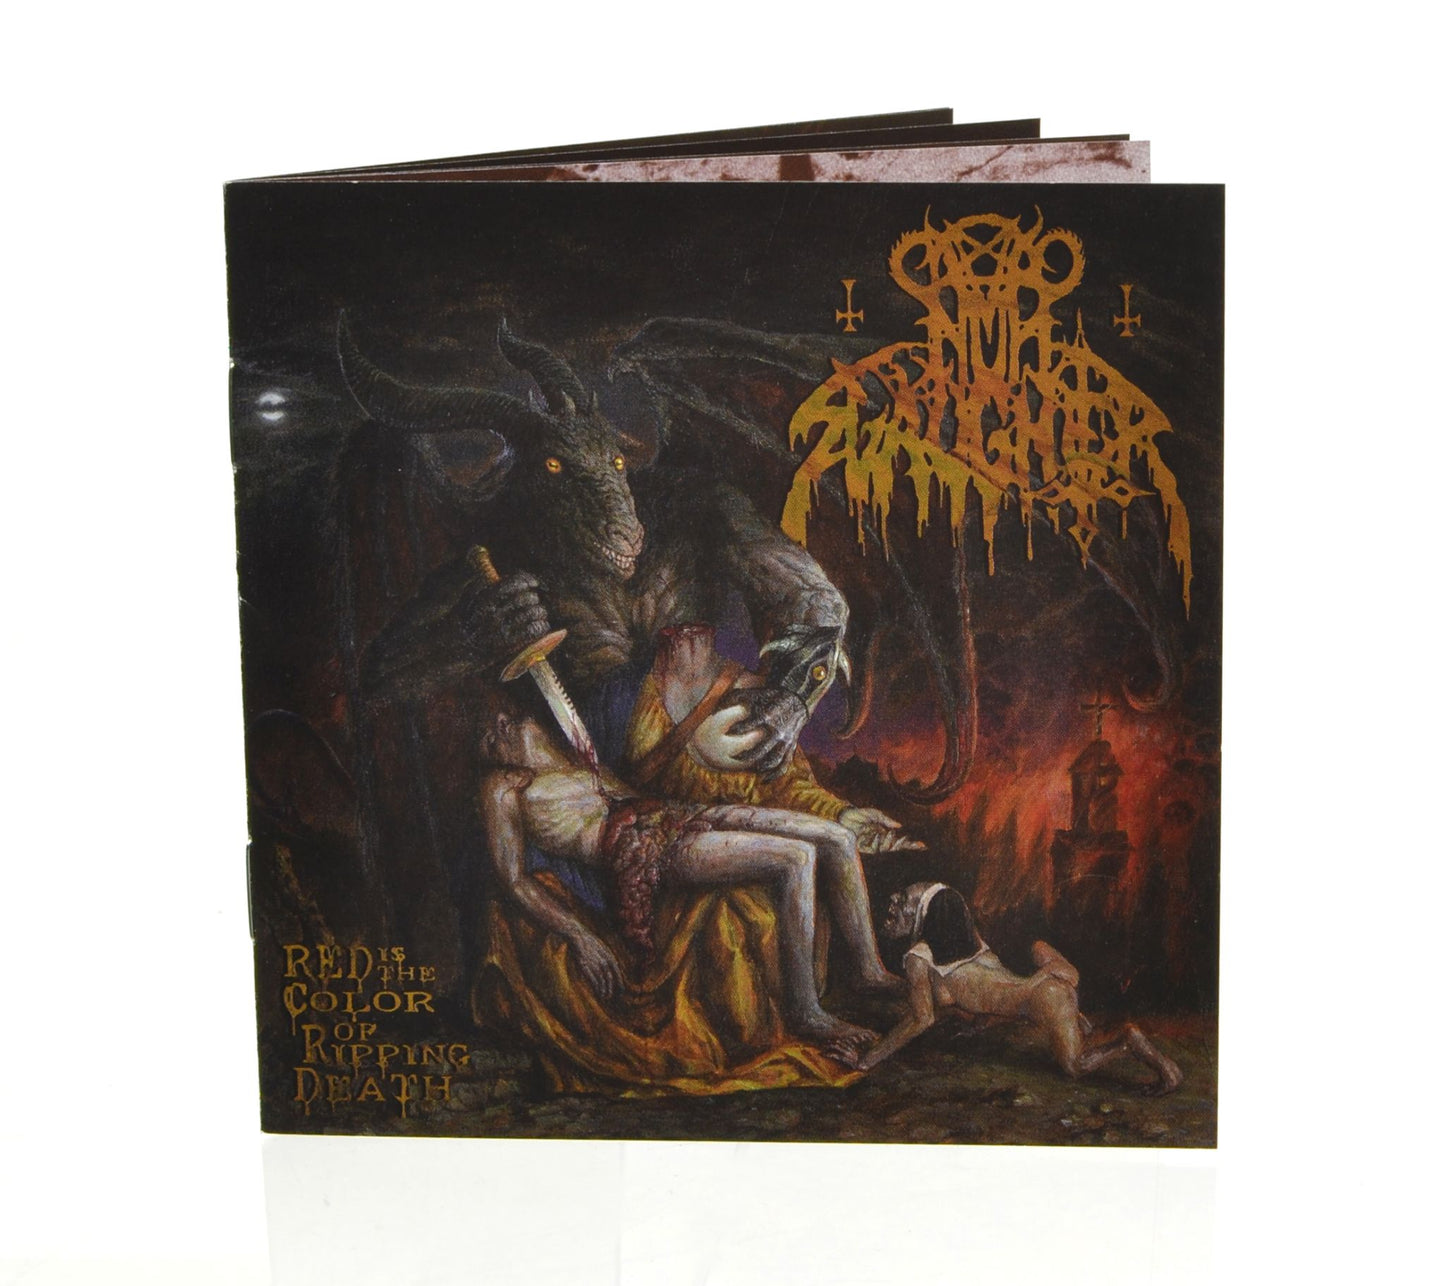 NUNSLAUGHTER - Red Is The Color Of Ripping Death (CD - Black Disc!) Devil Death Metal aus USA